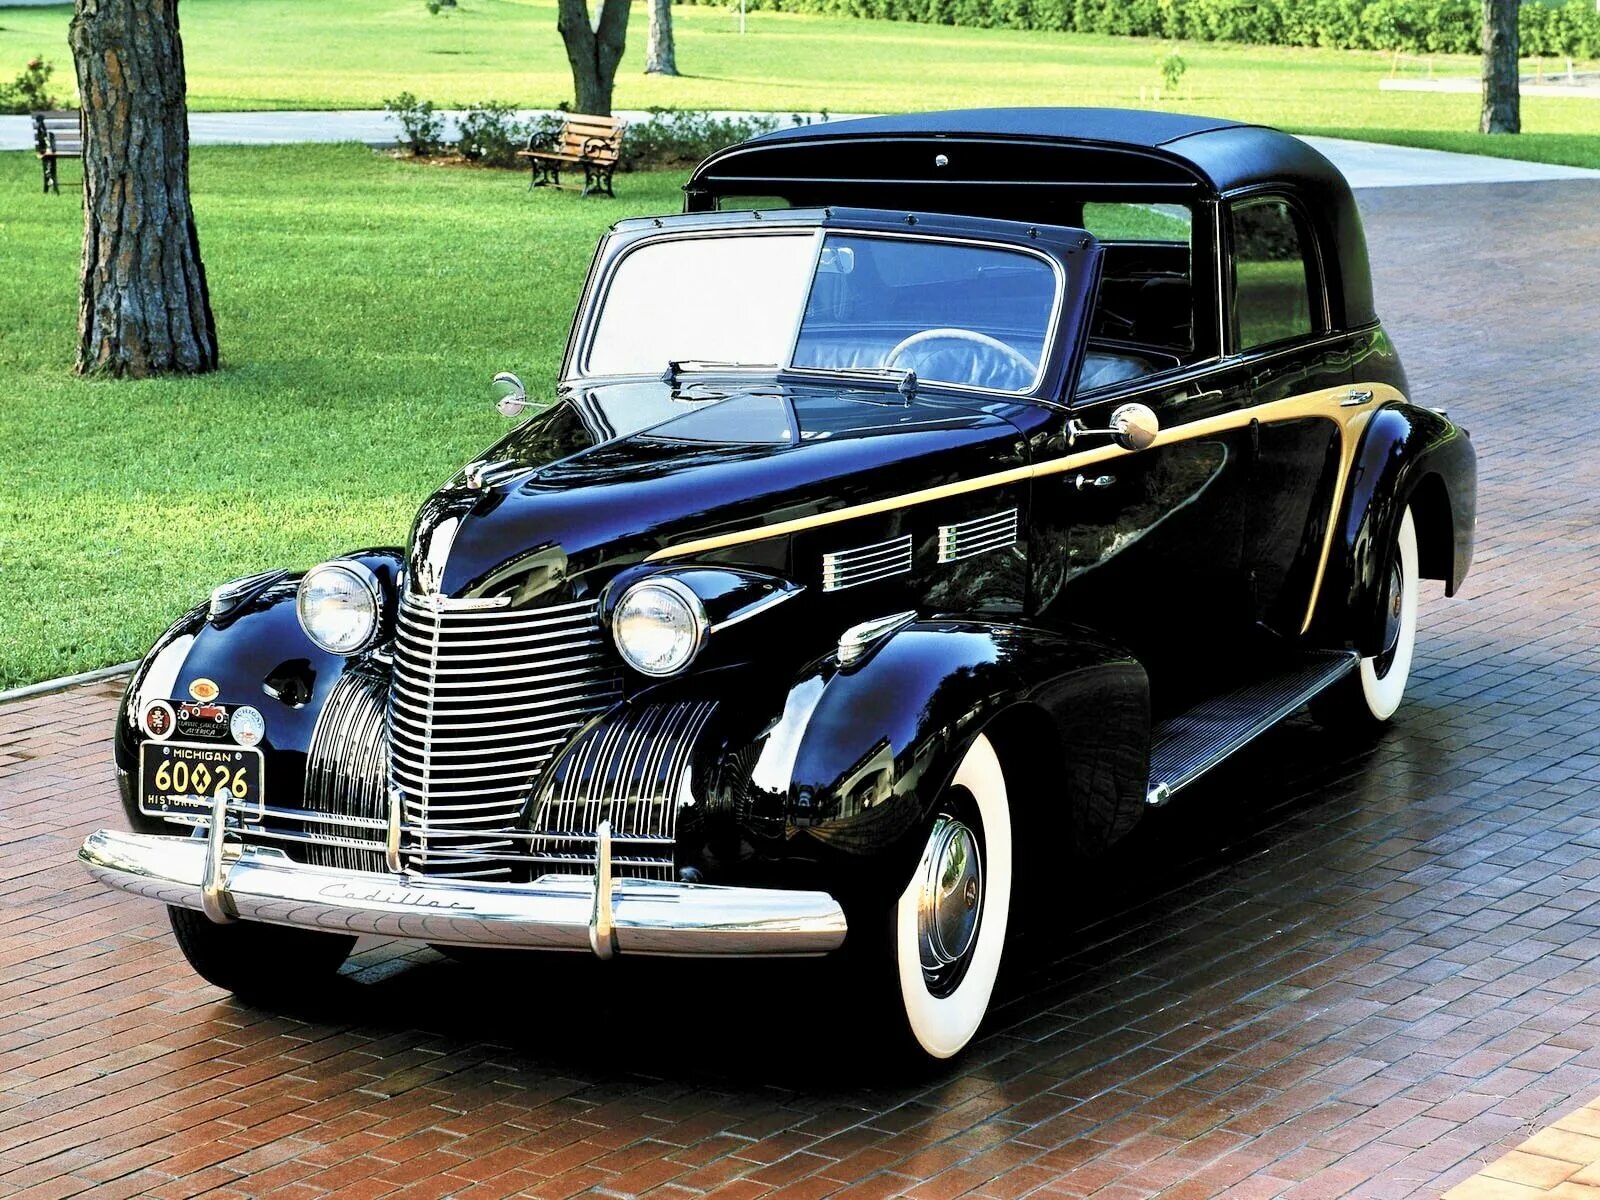 Best old cars. Cadillac 1939 Roadster. Cadillac 1940-1960. Mercedes-Benz ретро Кадиллак. 1933 Cadillac Town sedan.